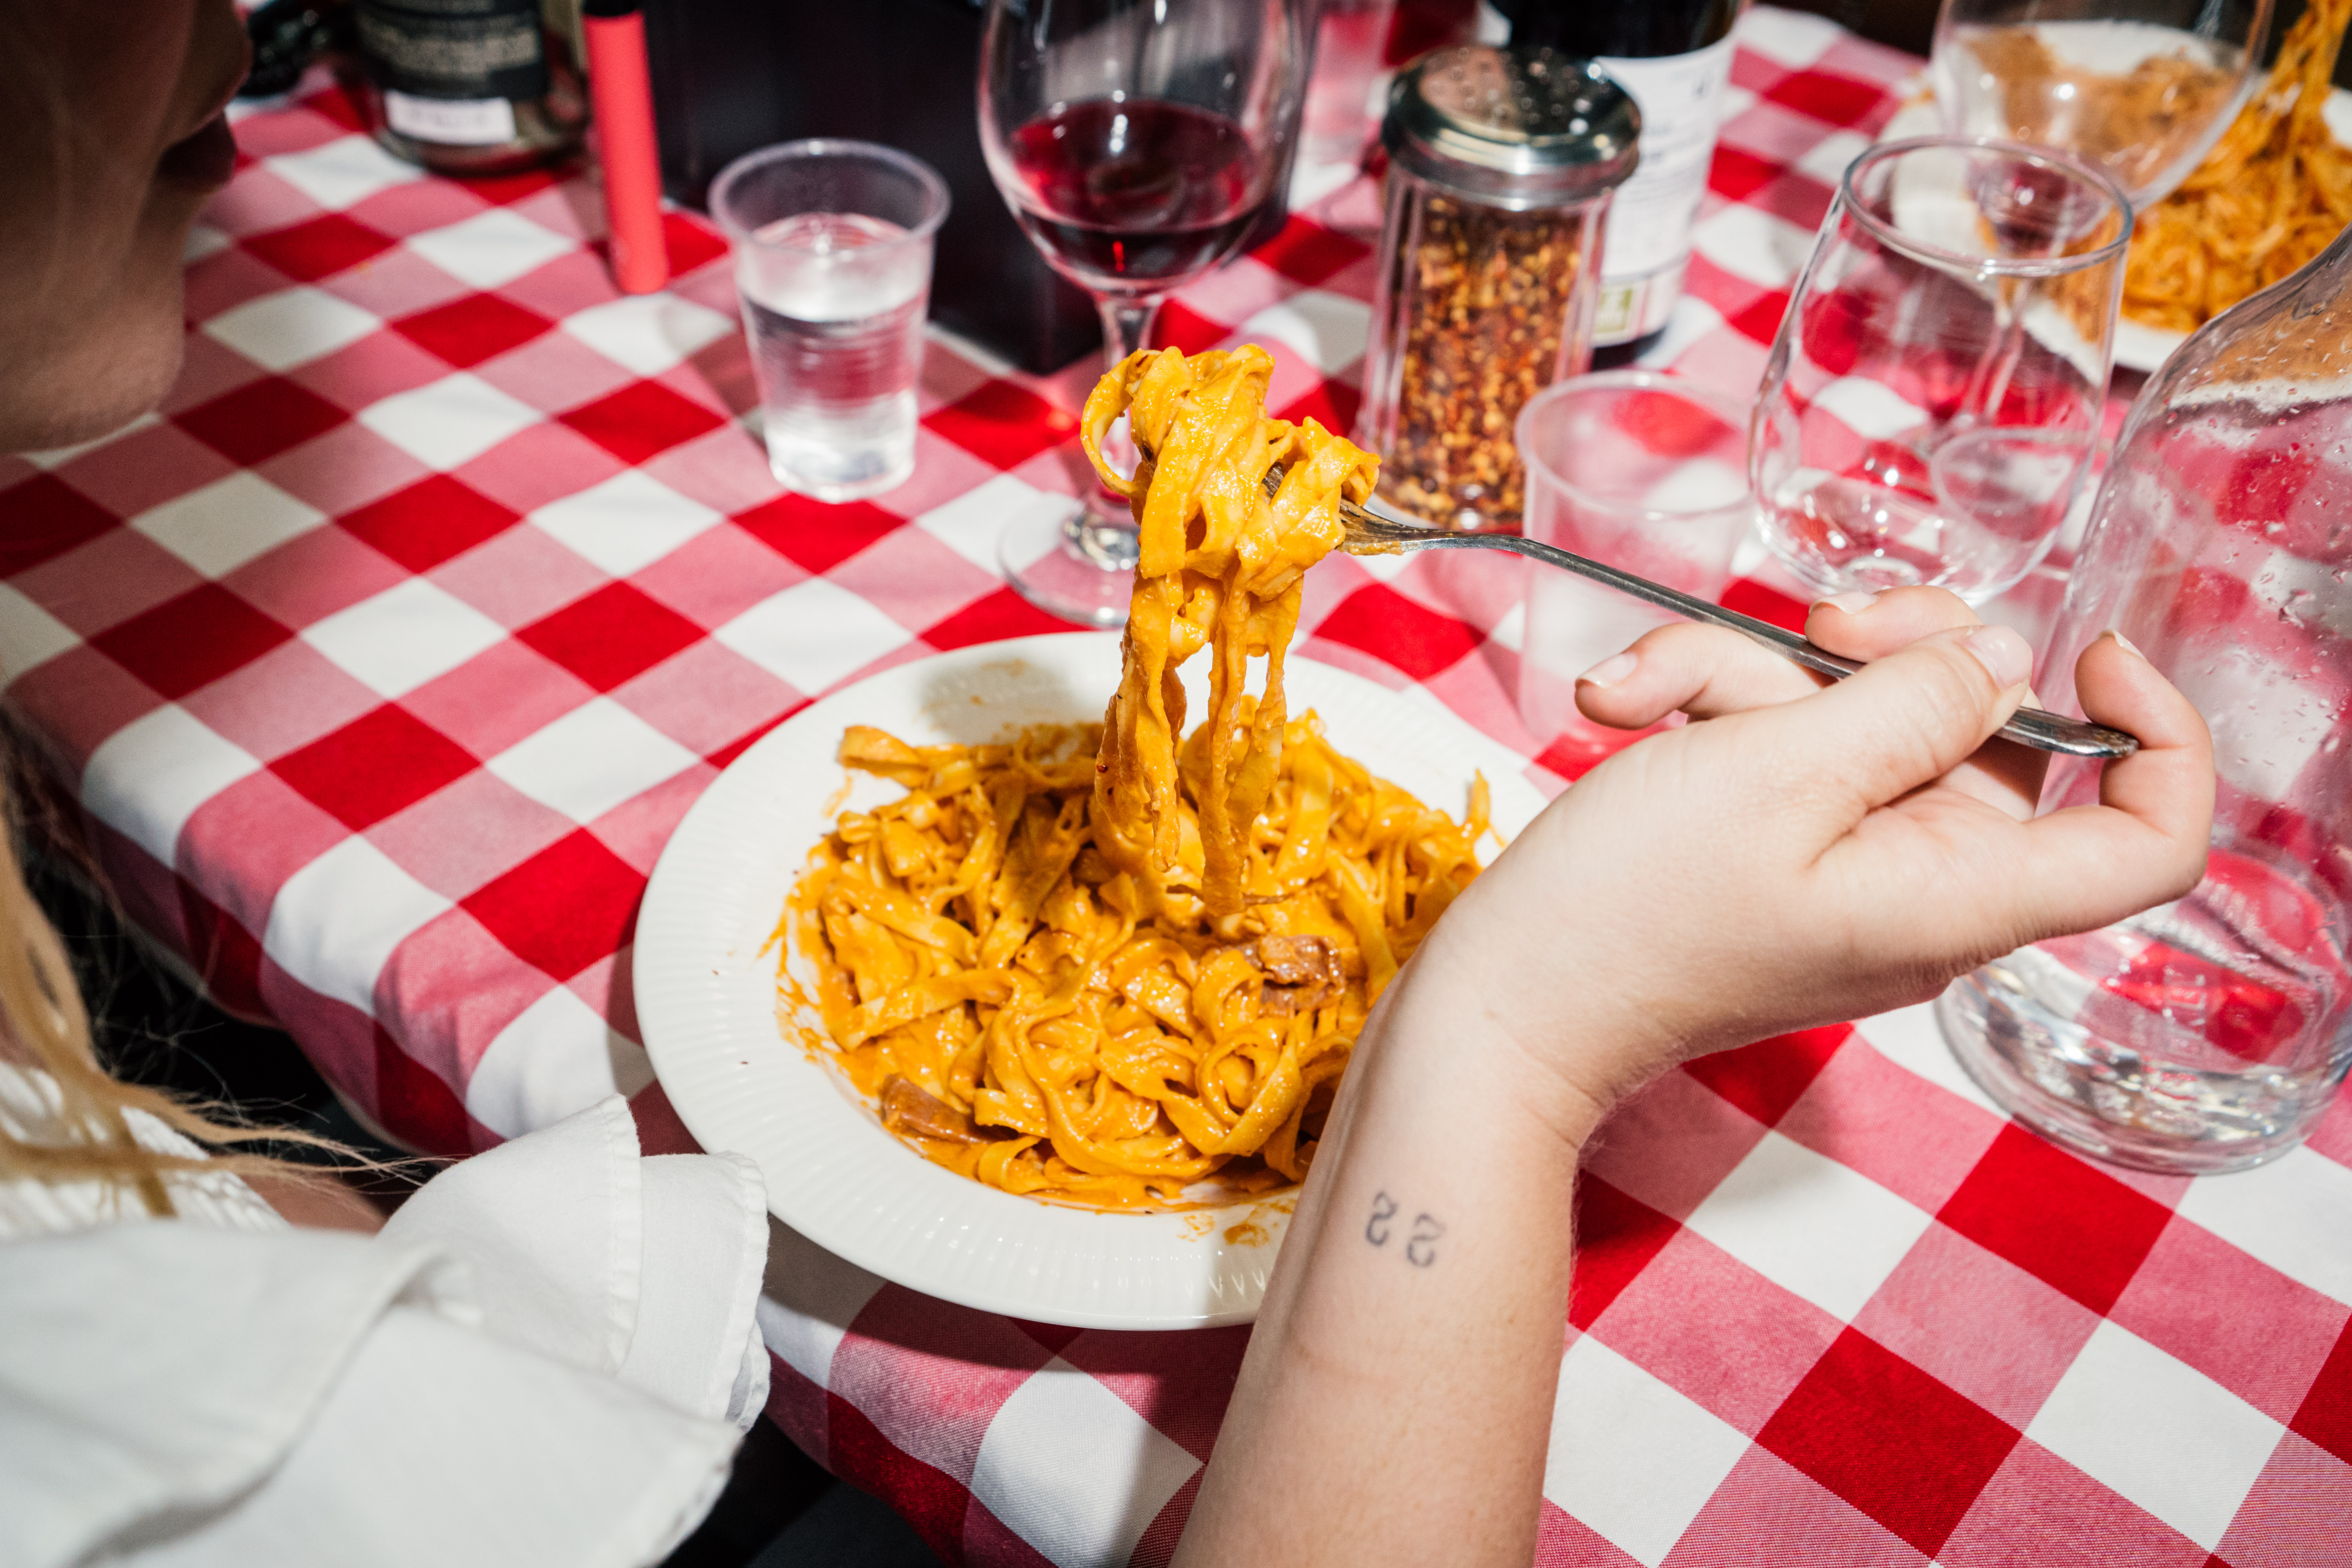 A hand twirls a plate of pasta on a red gingham table.